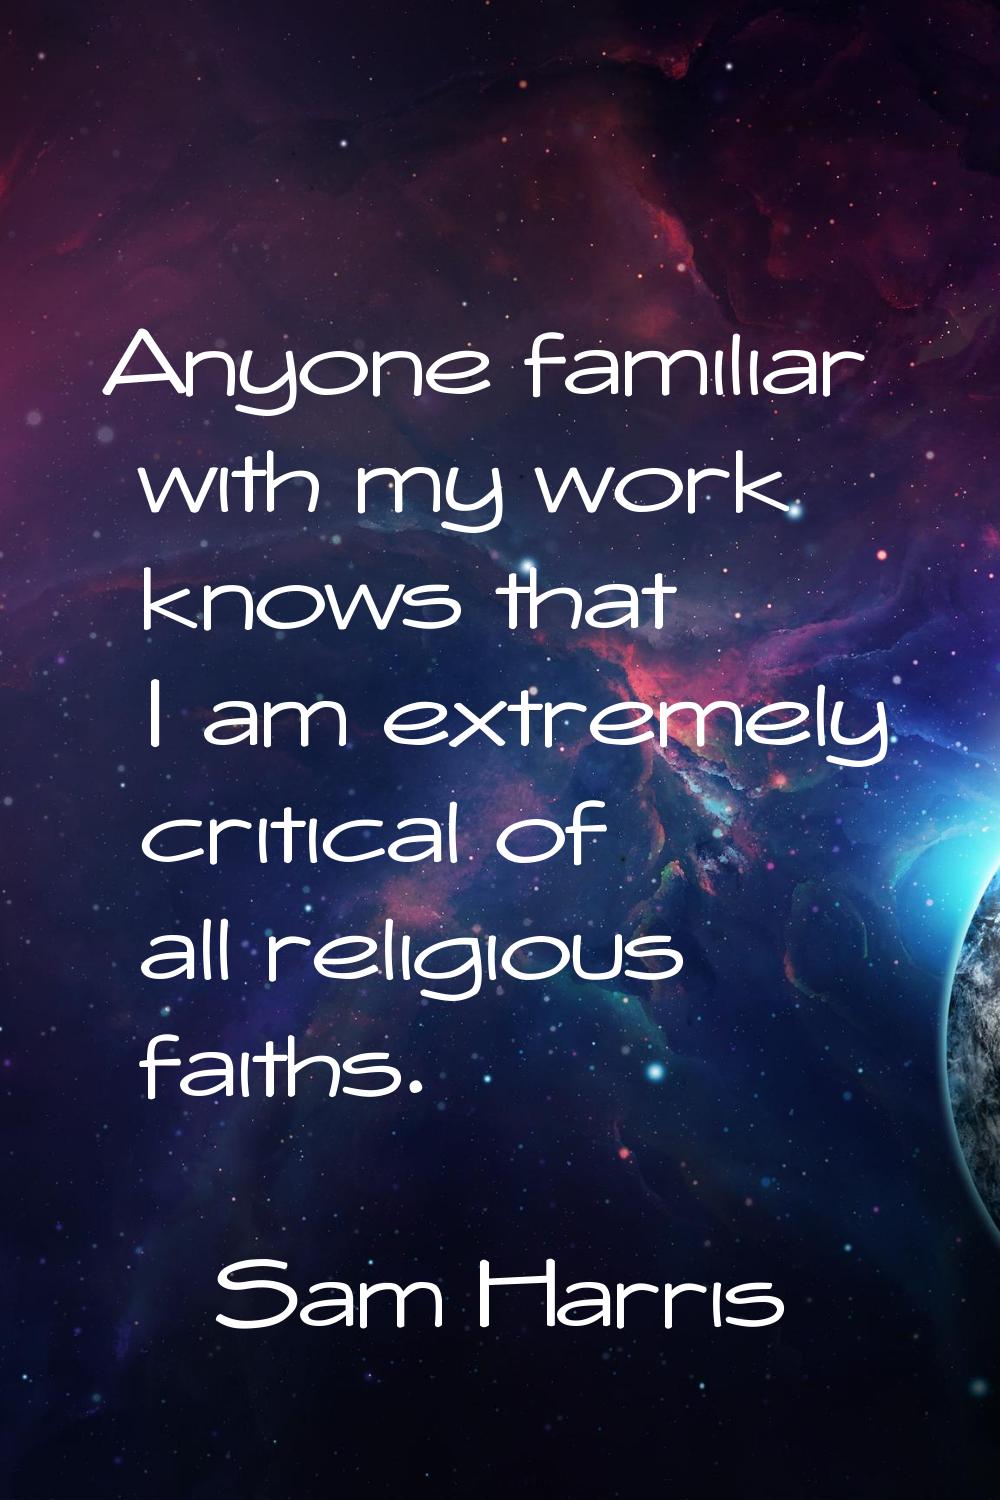 Anyone familiar with my work knows that I am extremely critical of all religious faiths.